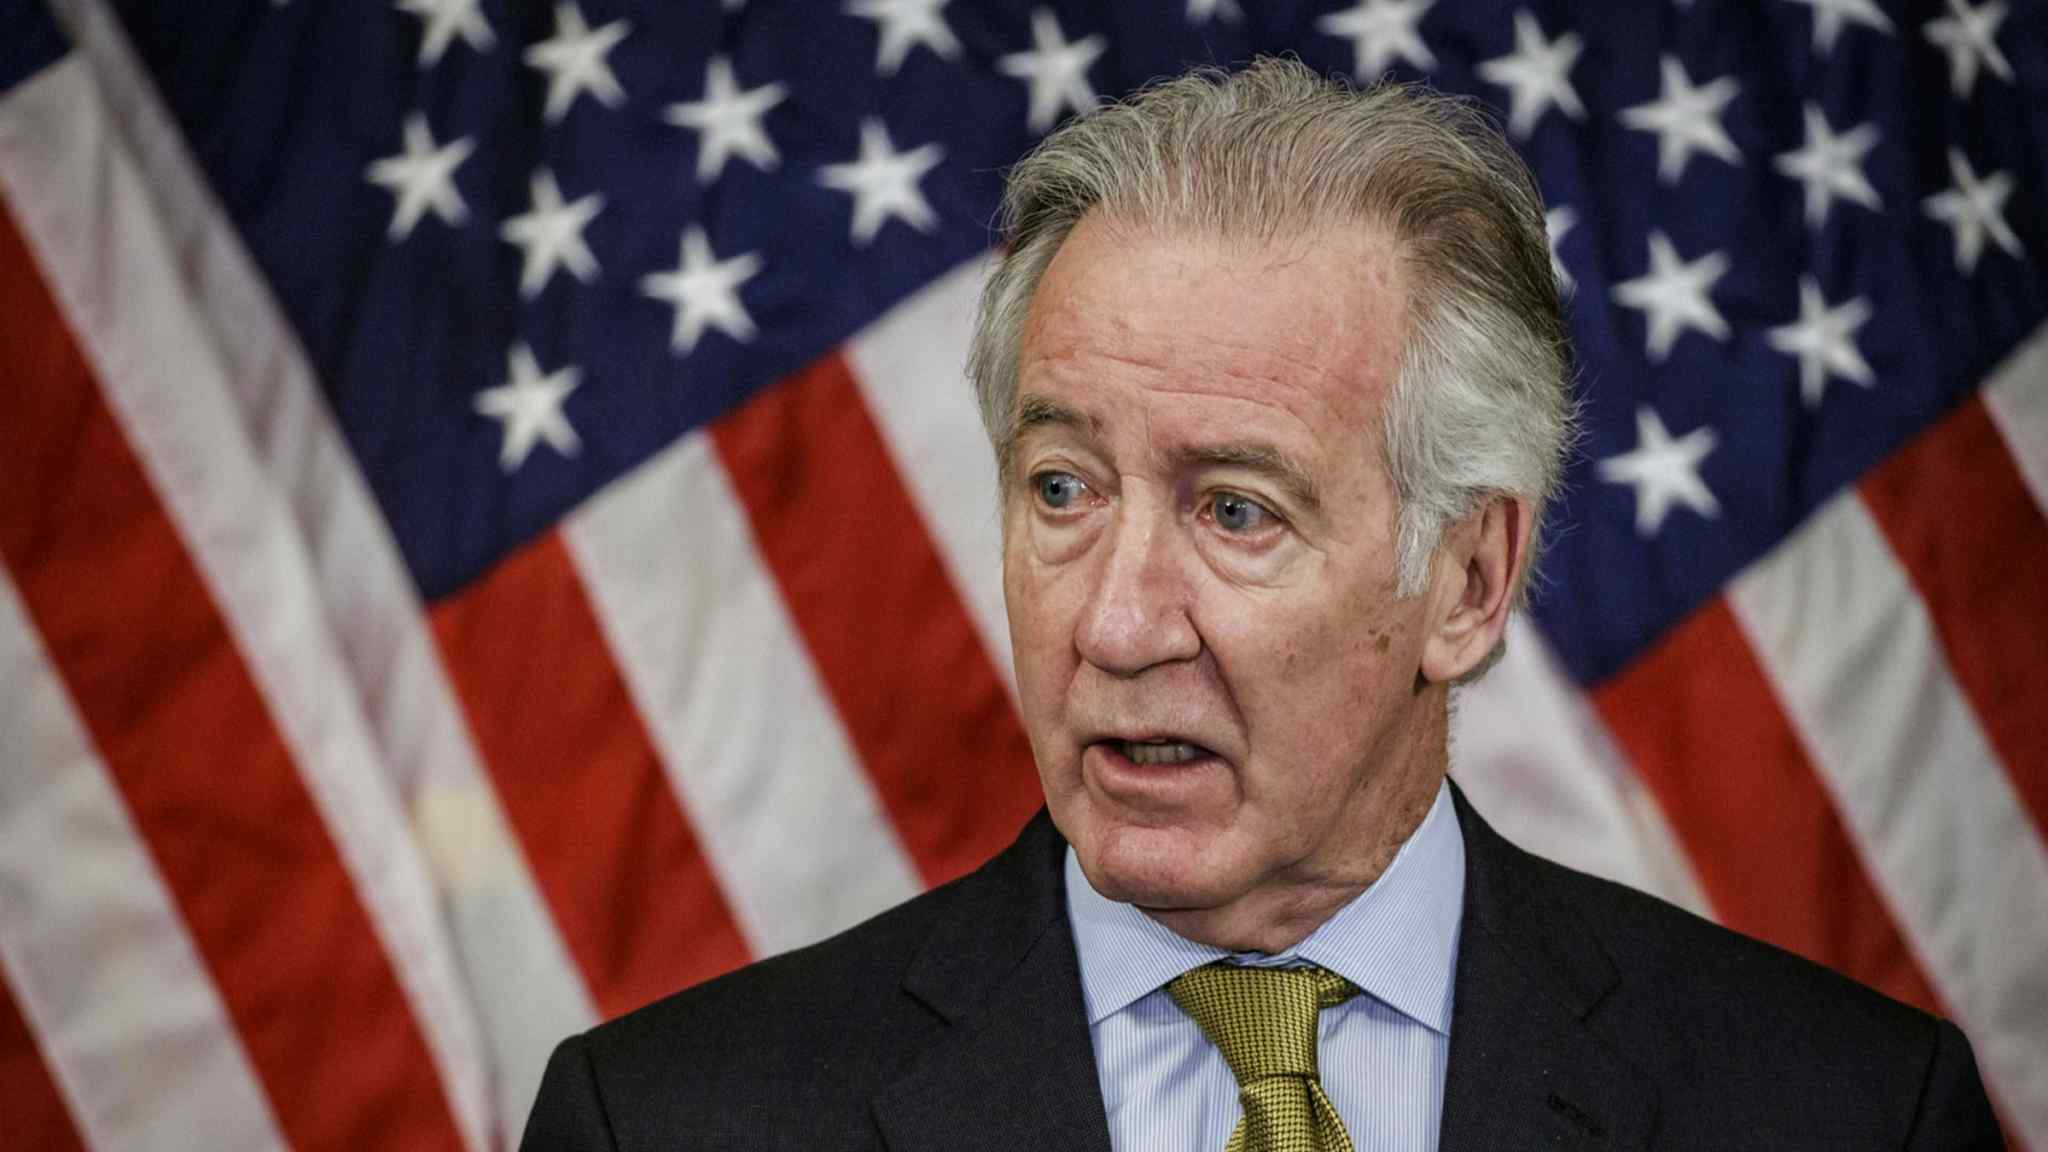 Senior US lawmaker pushes UK to find ‘solution’ to N Ireland stand-off